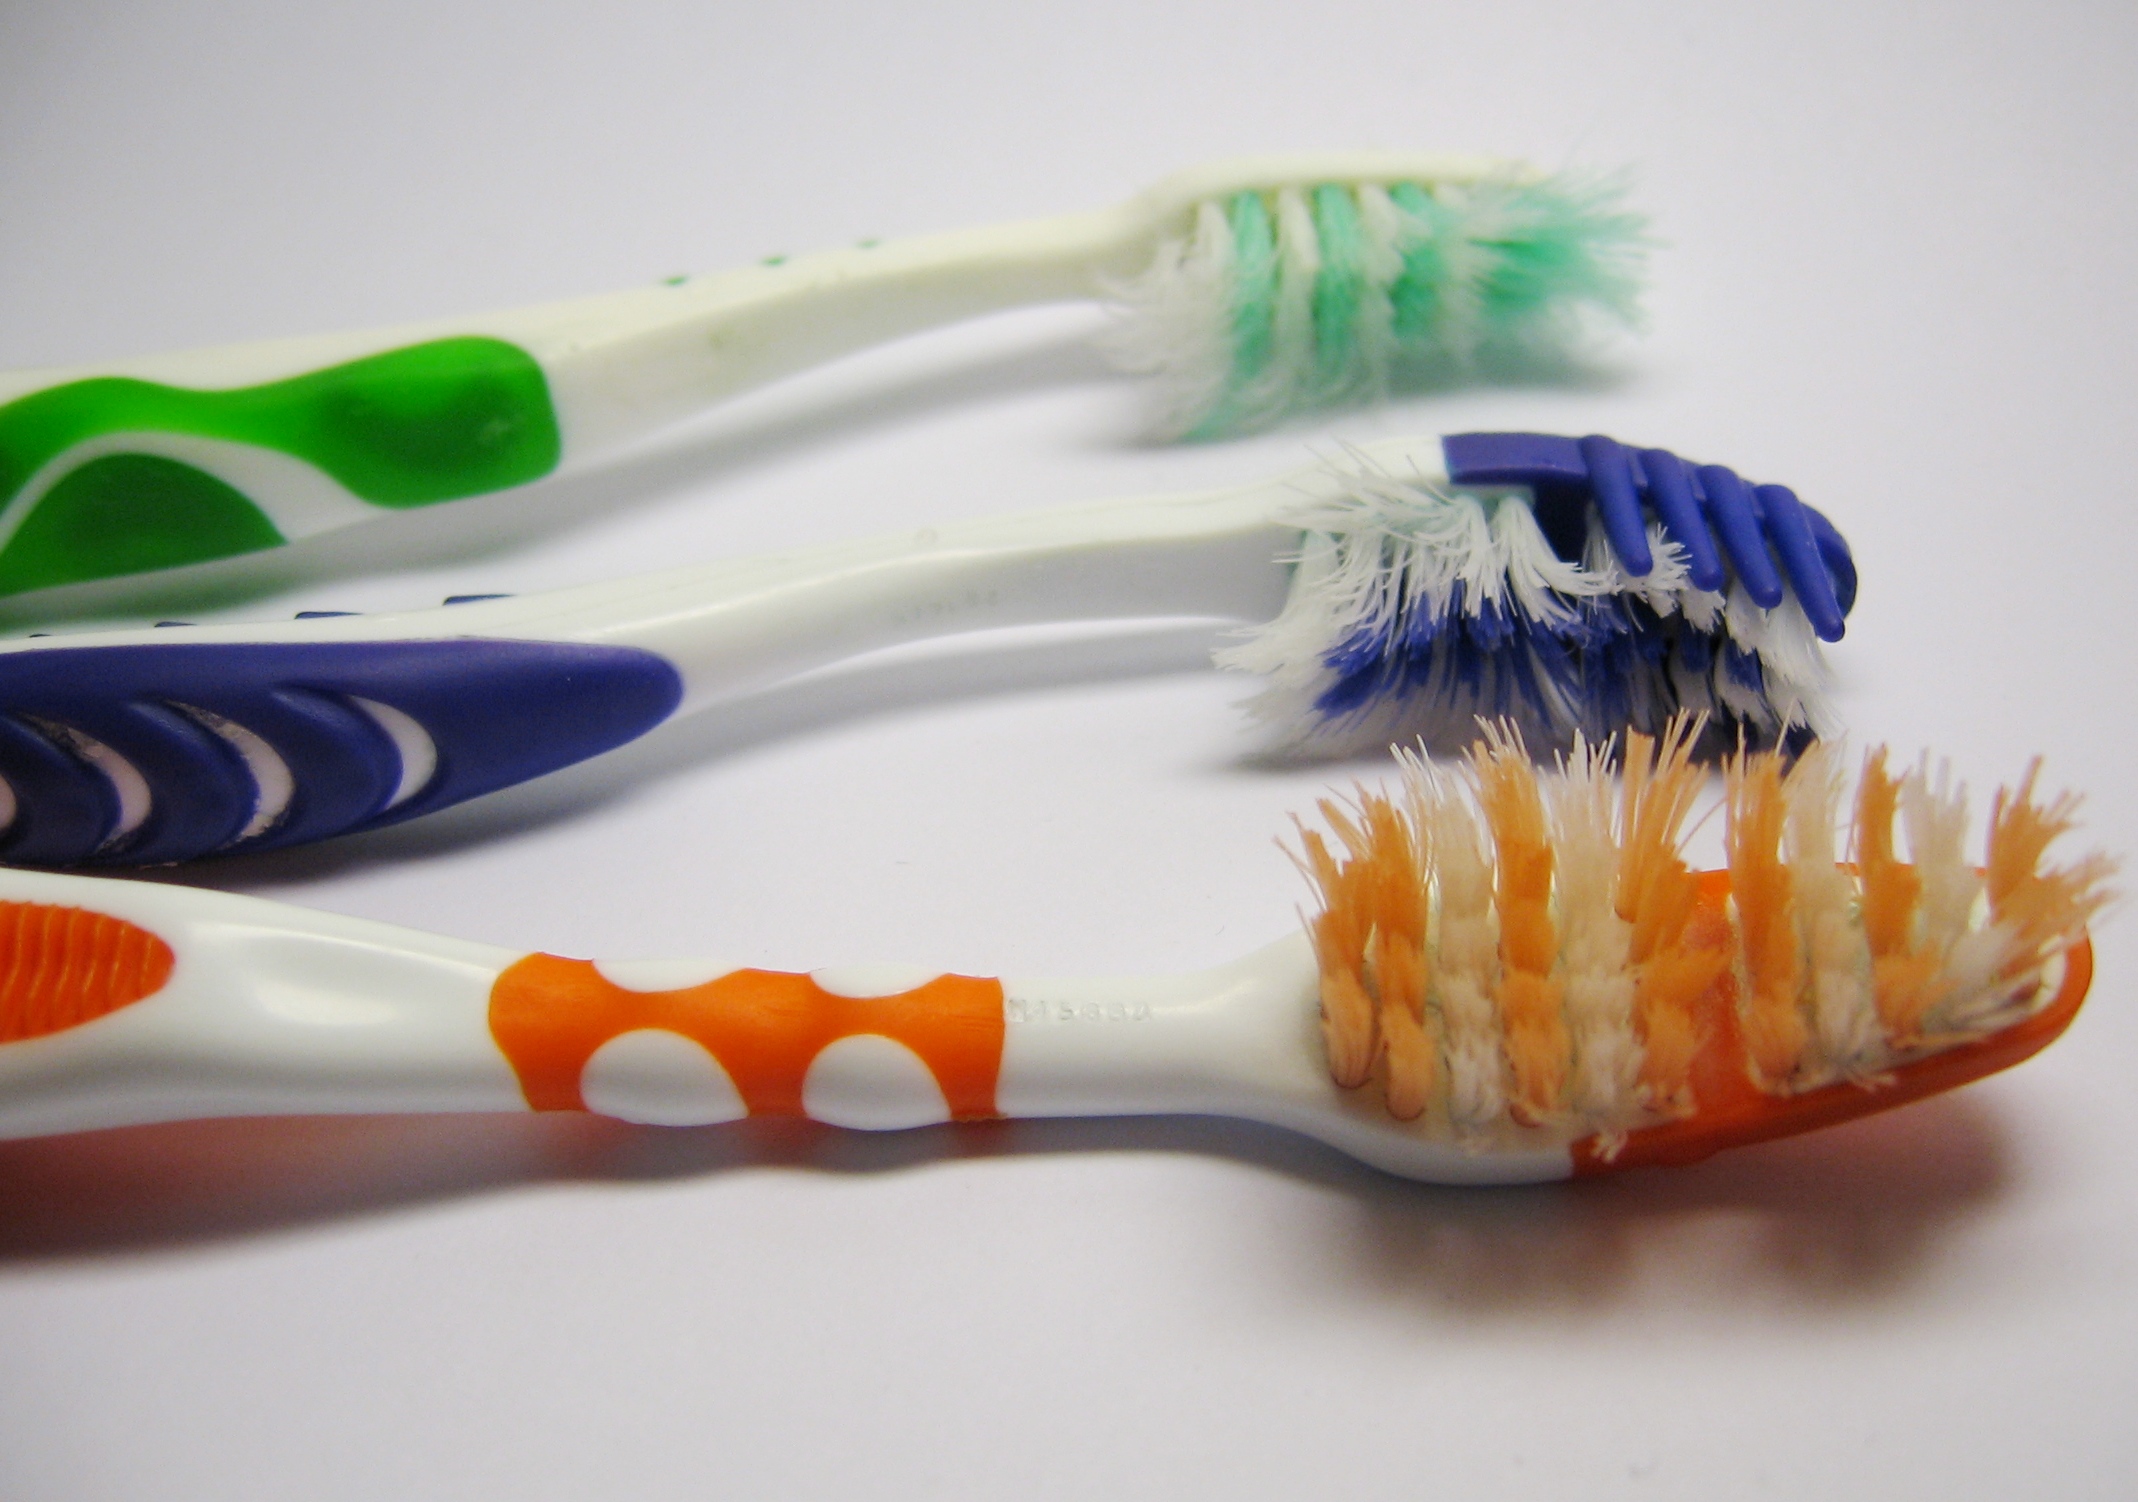 Your toothbrush may be nastier than you think. Find out when to ditch it.